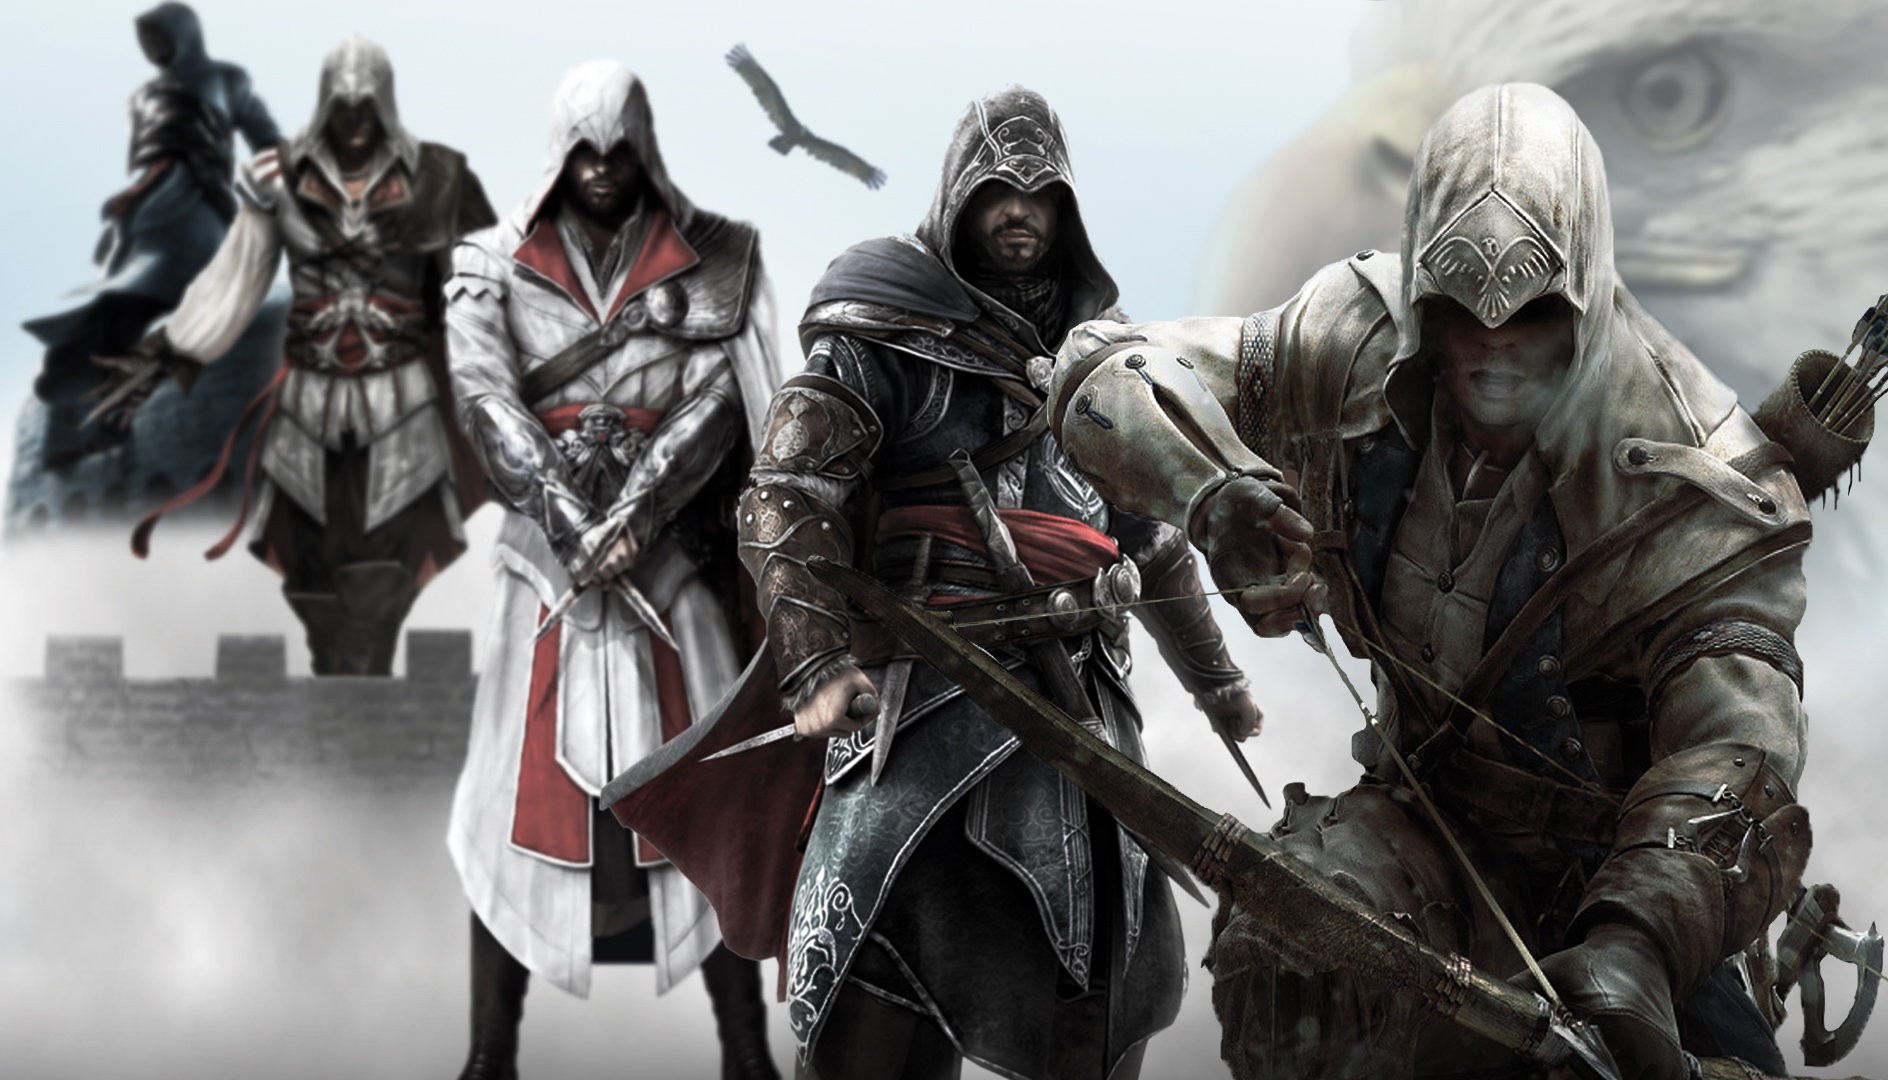 General 1888x1080 video games Assassin's Creed video game art PC gaming video game men